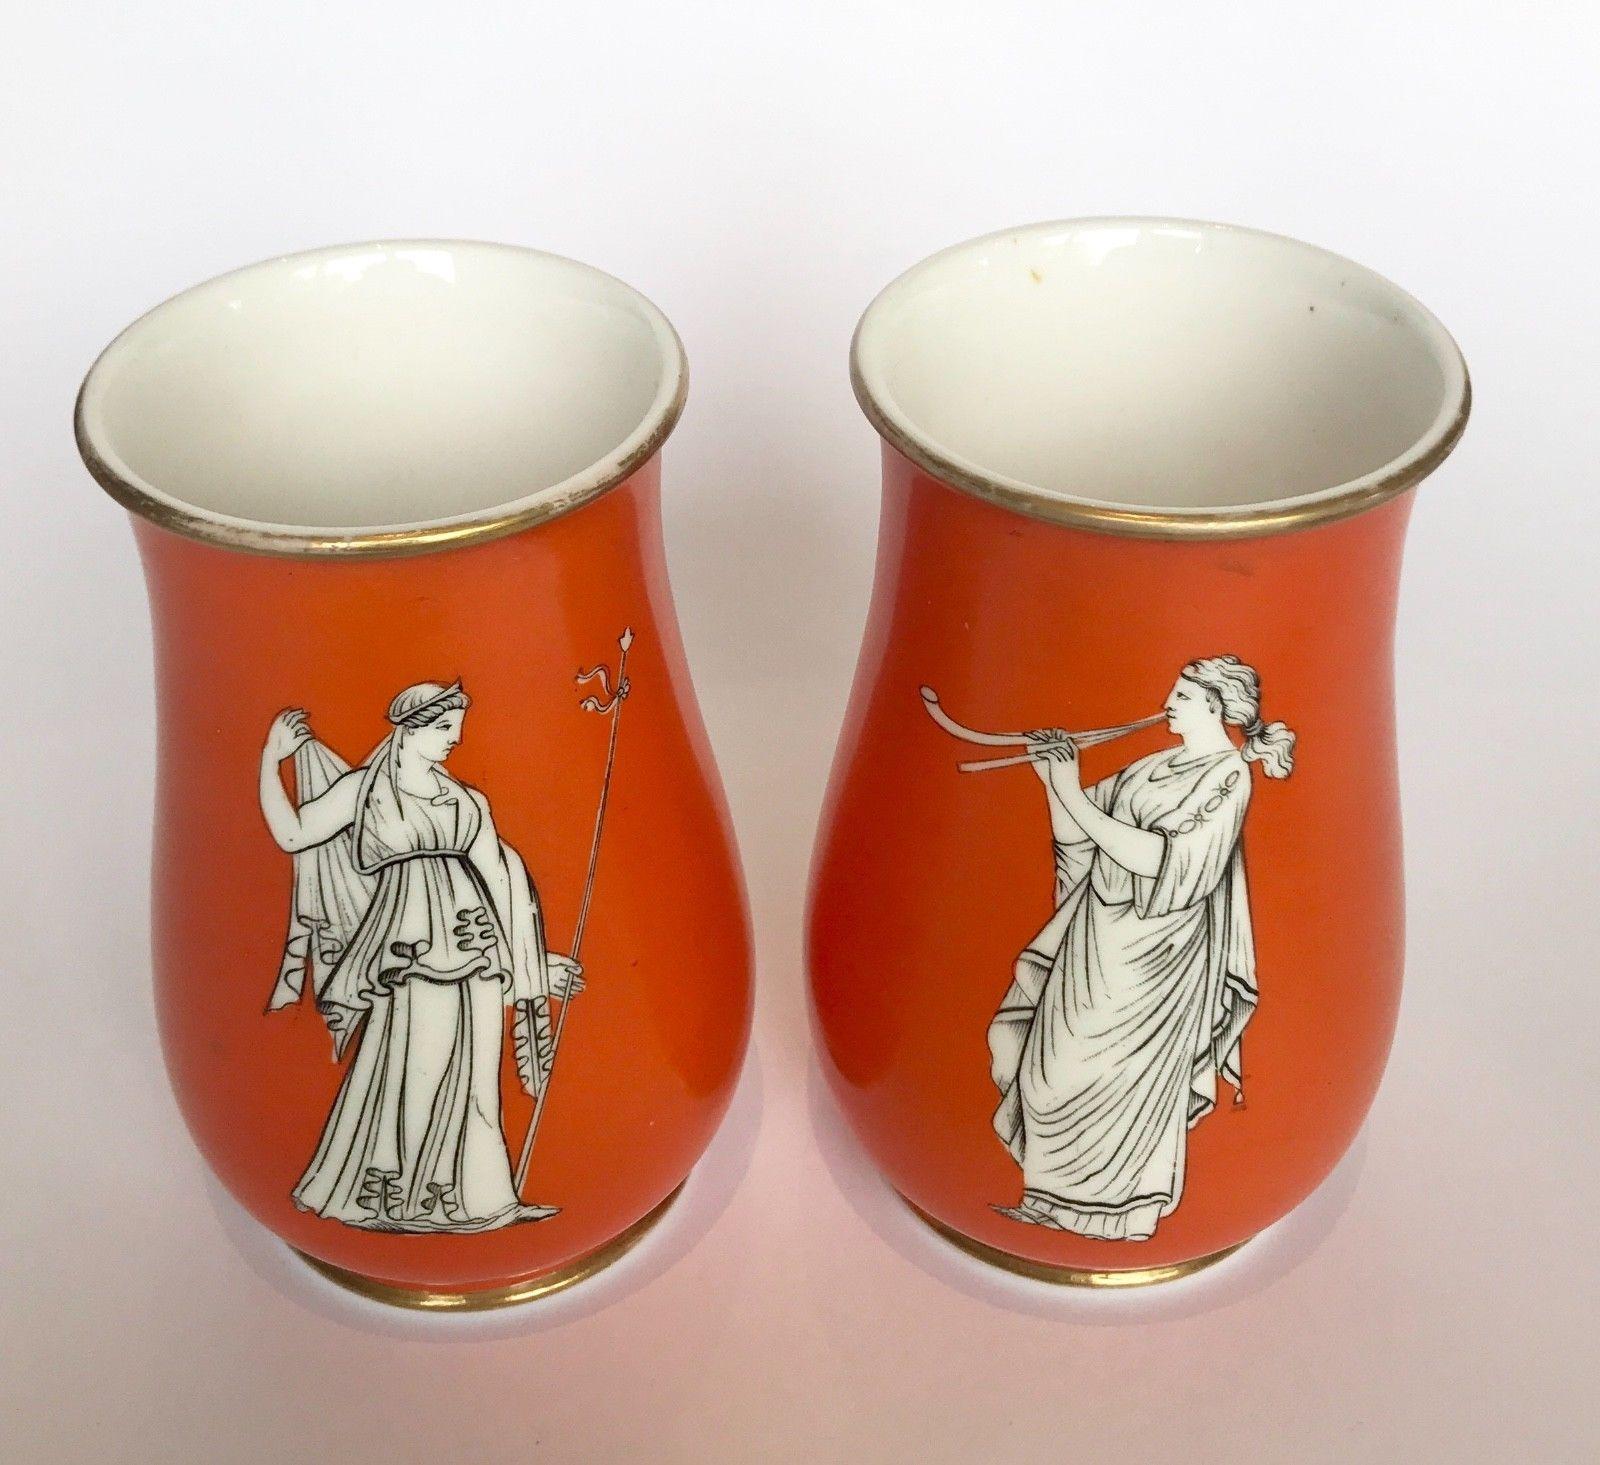 19th century pair of Samuel Alcock neoclassical porcelain vases, circa 1860 decorated with Grecian maidens playing musical instruments all against an orange ground.